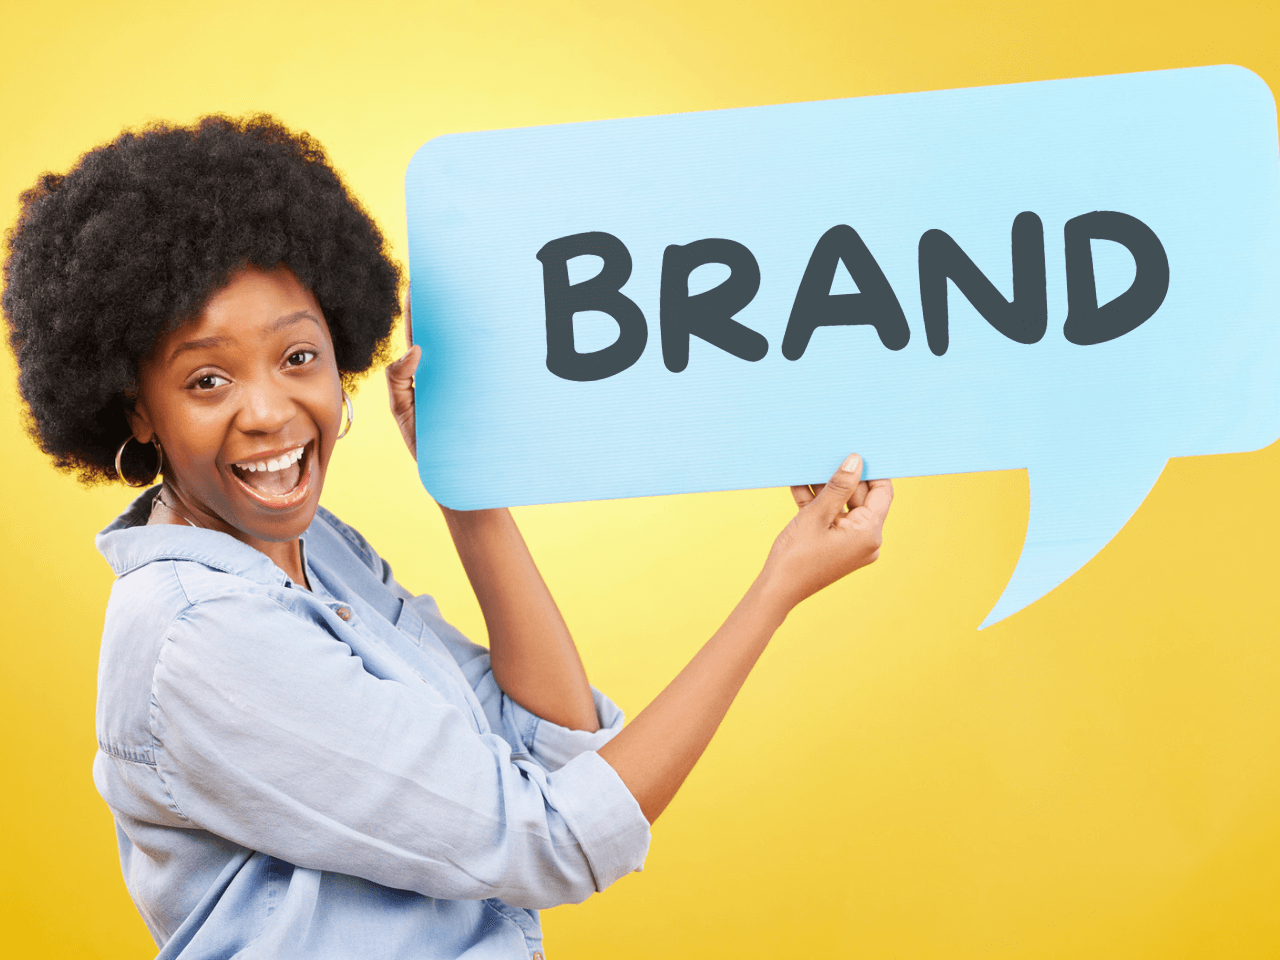 Job seekers: how to build your brand to get the job